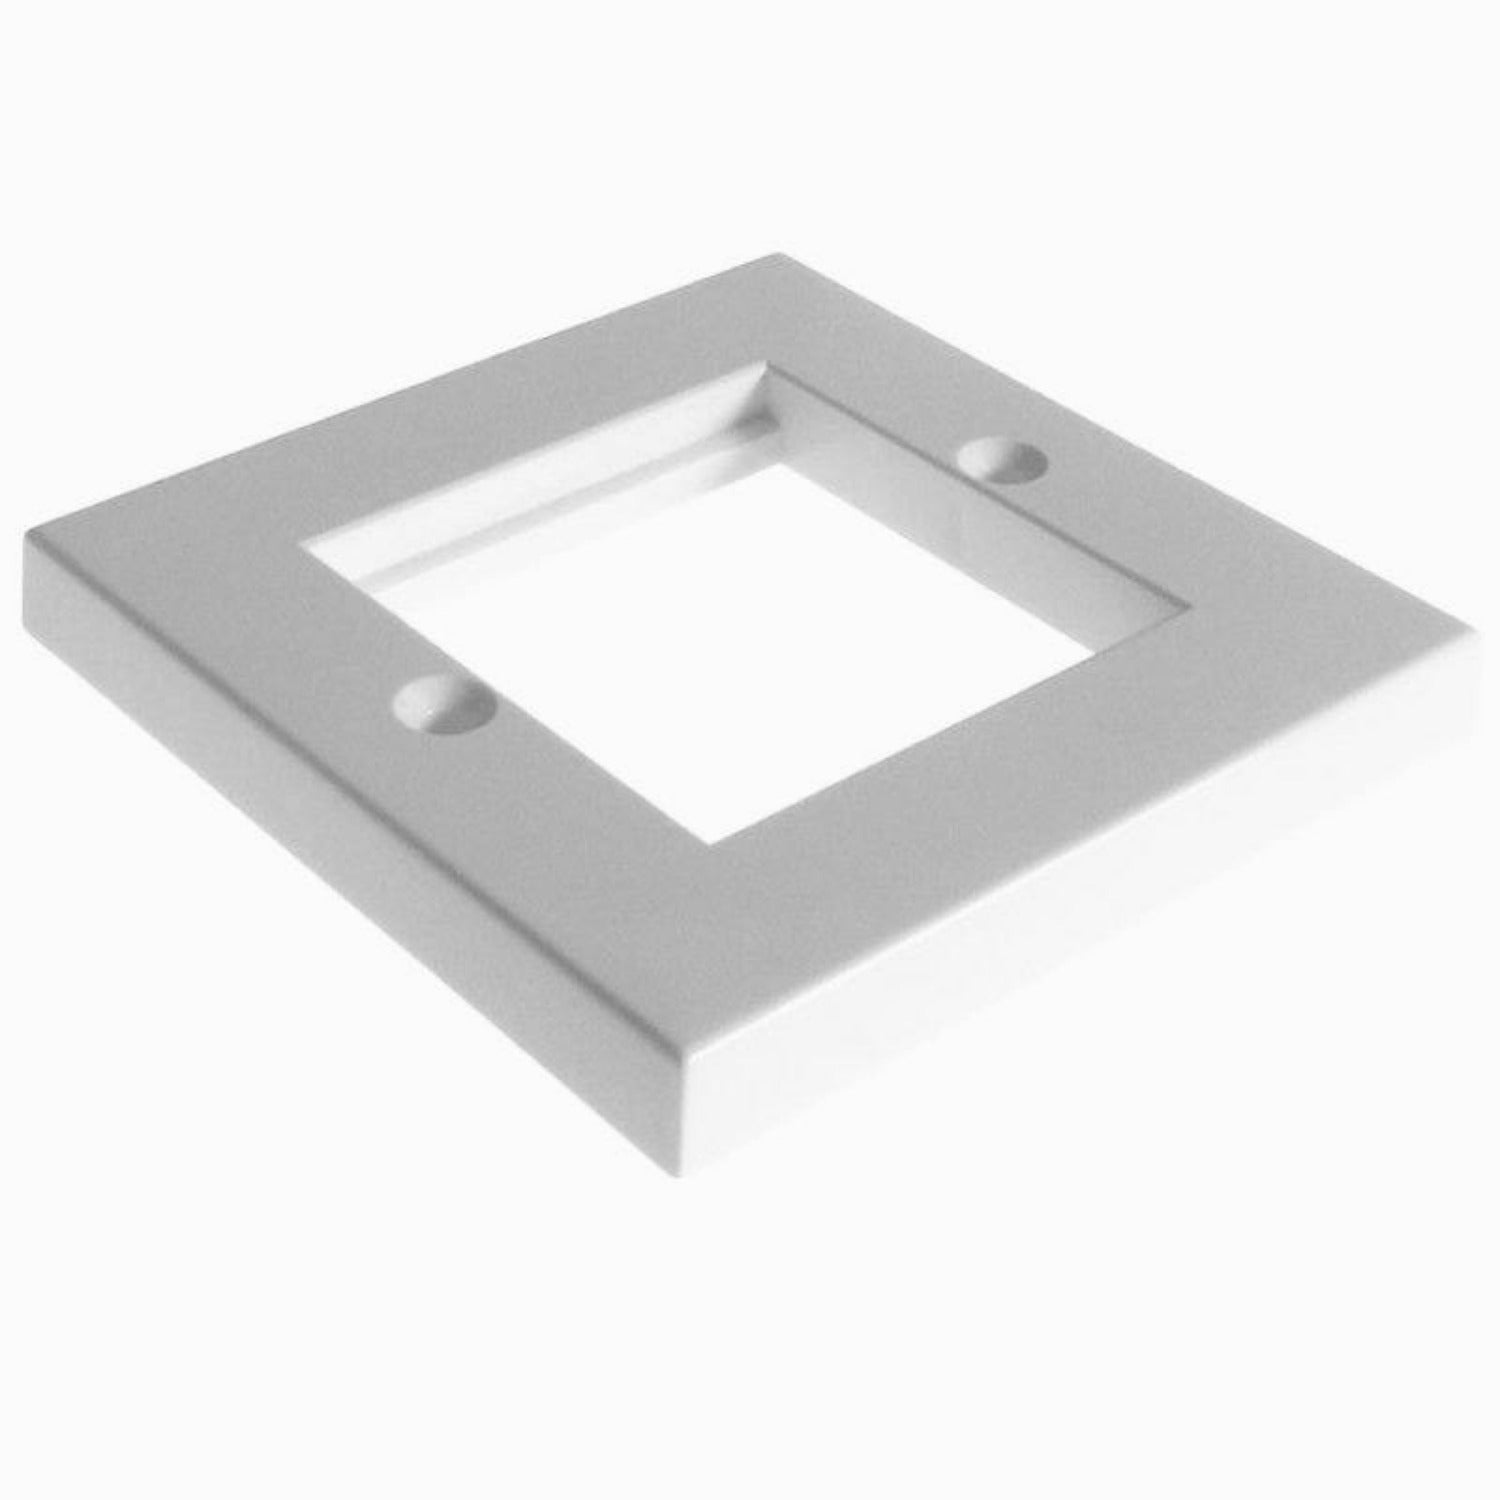 Compact surface mount housing